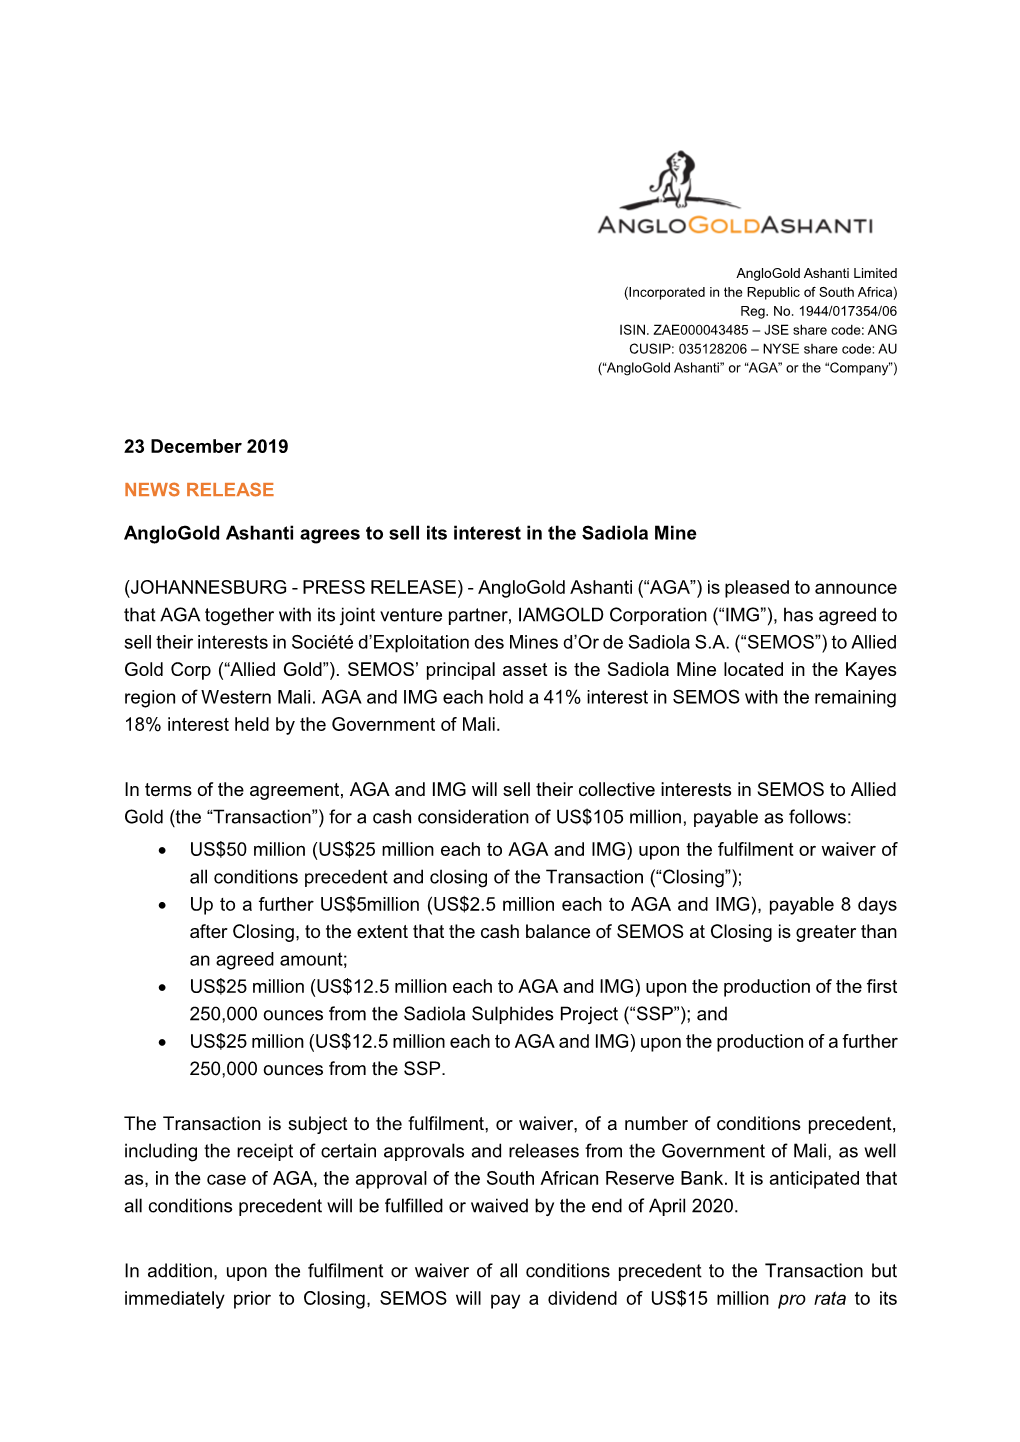 Anglogold Ashanti Agrees to Sell Its Interest in the Sadiola Mine